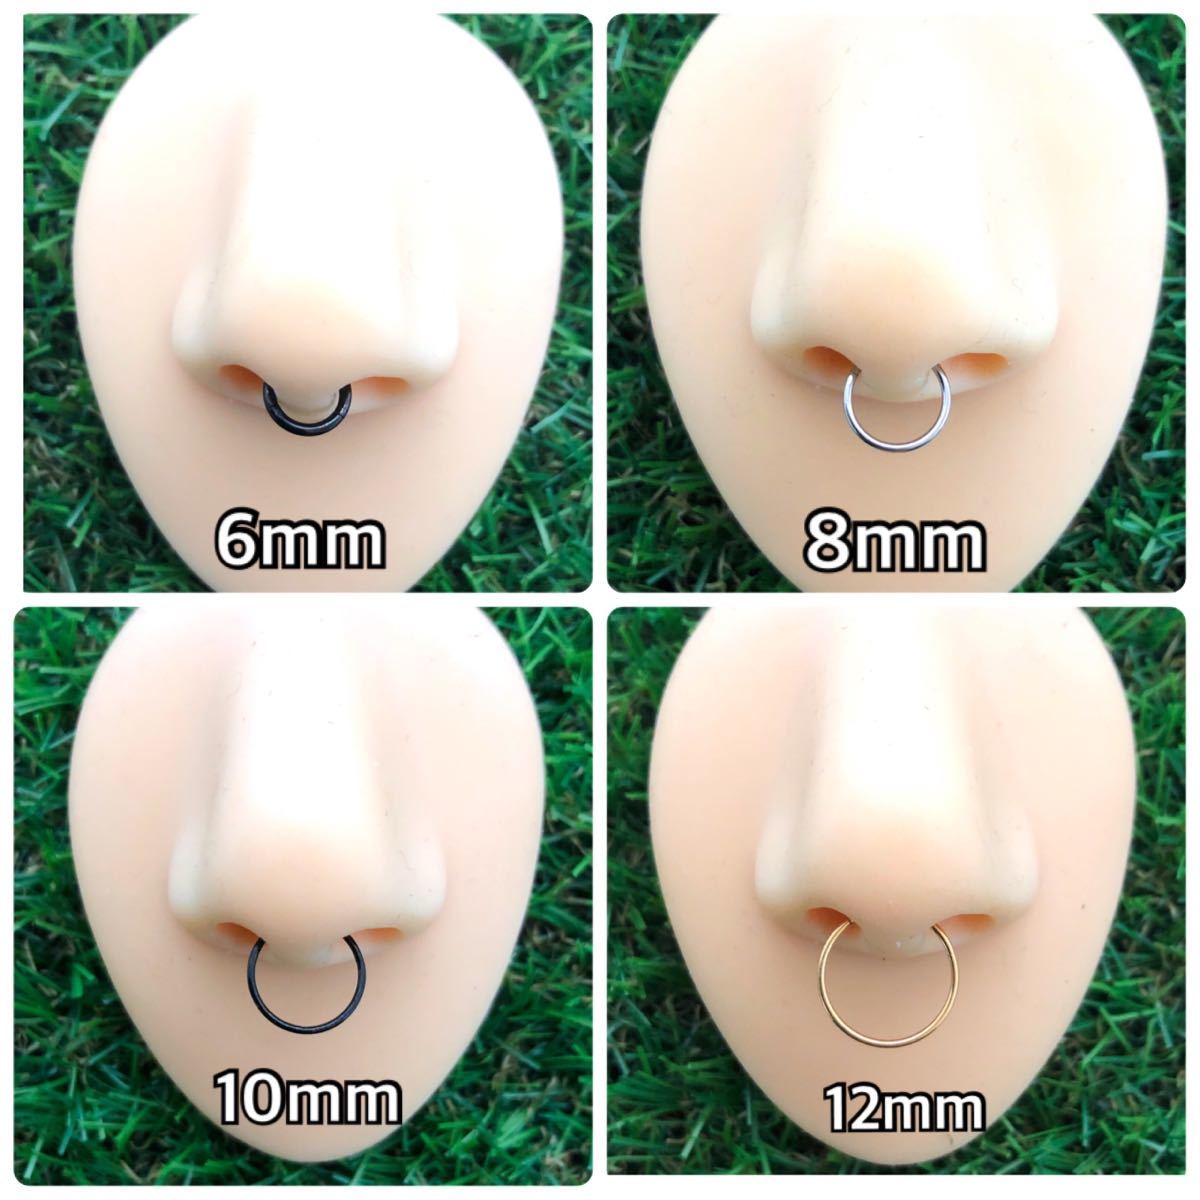  body pierce 18G 2 piece seg men to ring .. one touch 12mm surgical stainless steel nose ear .. attaching and detaching easy First earrings [ anonymity delivery ]